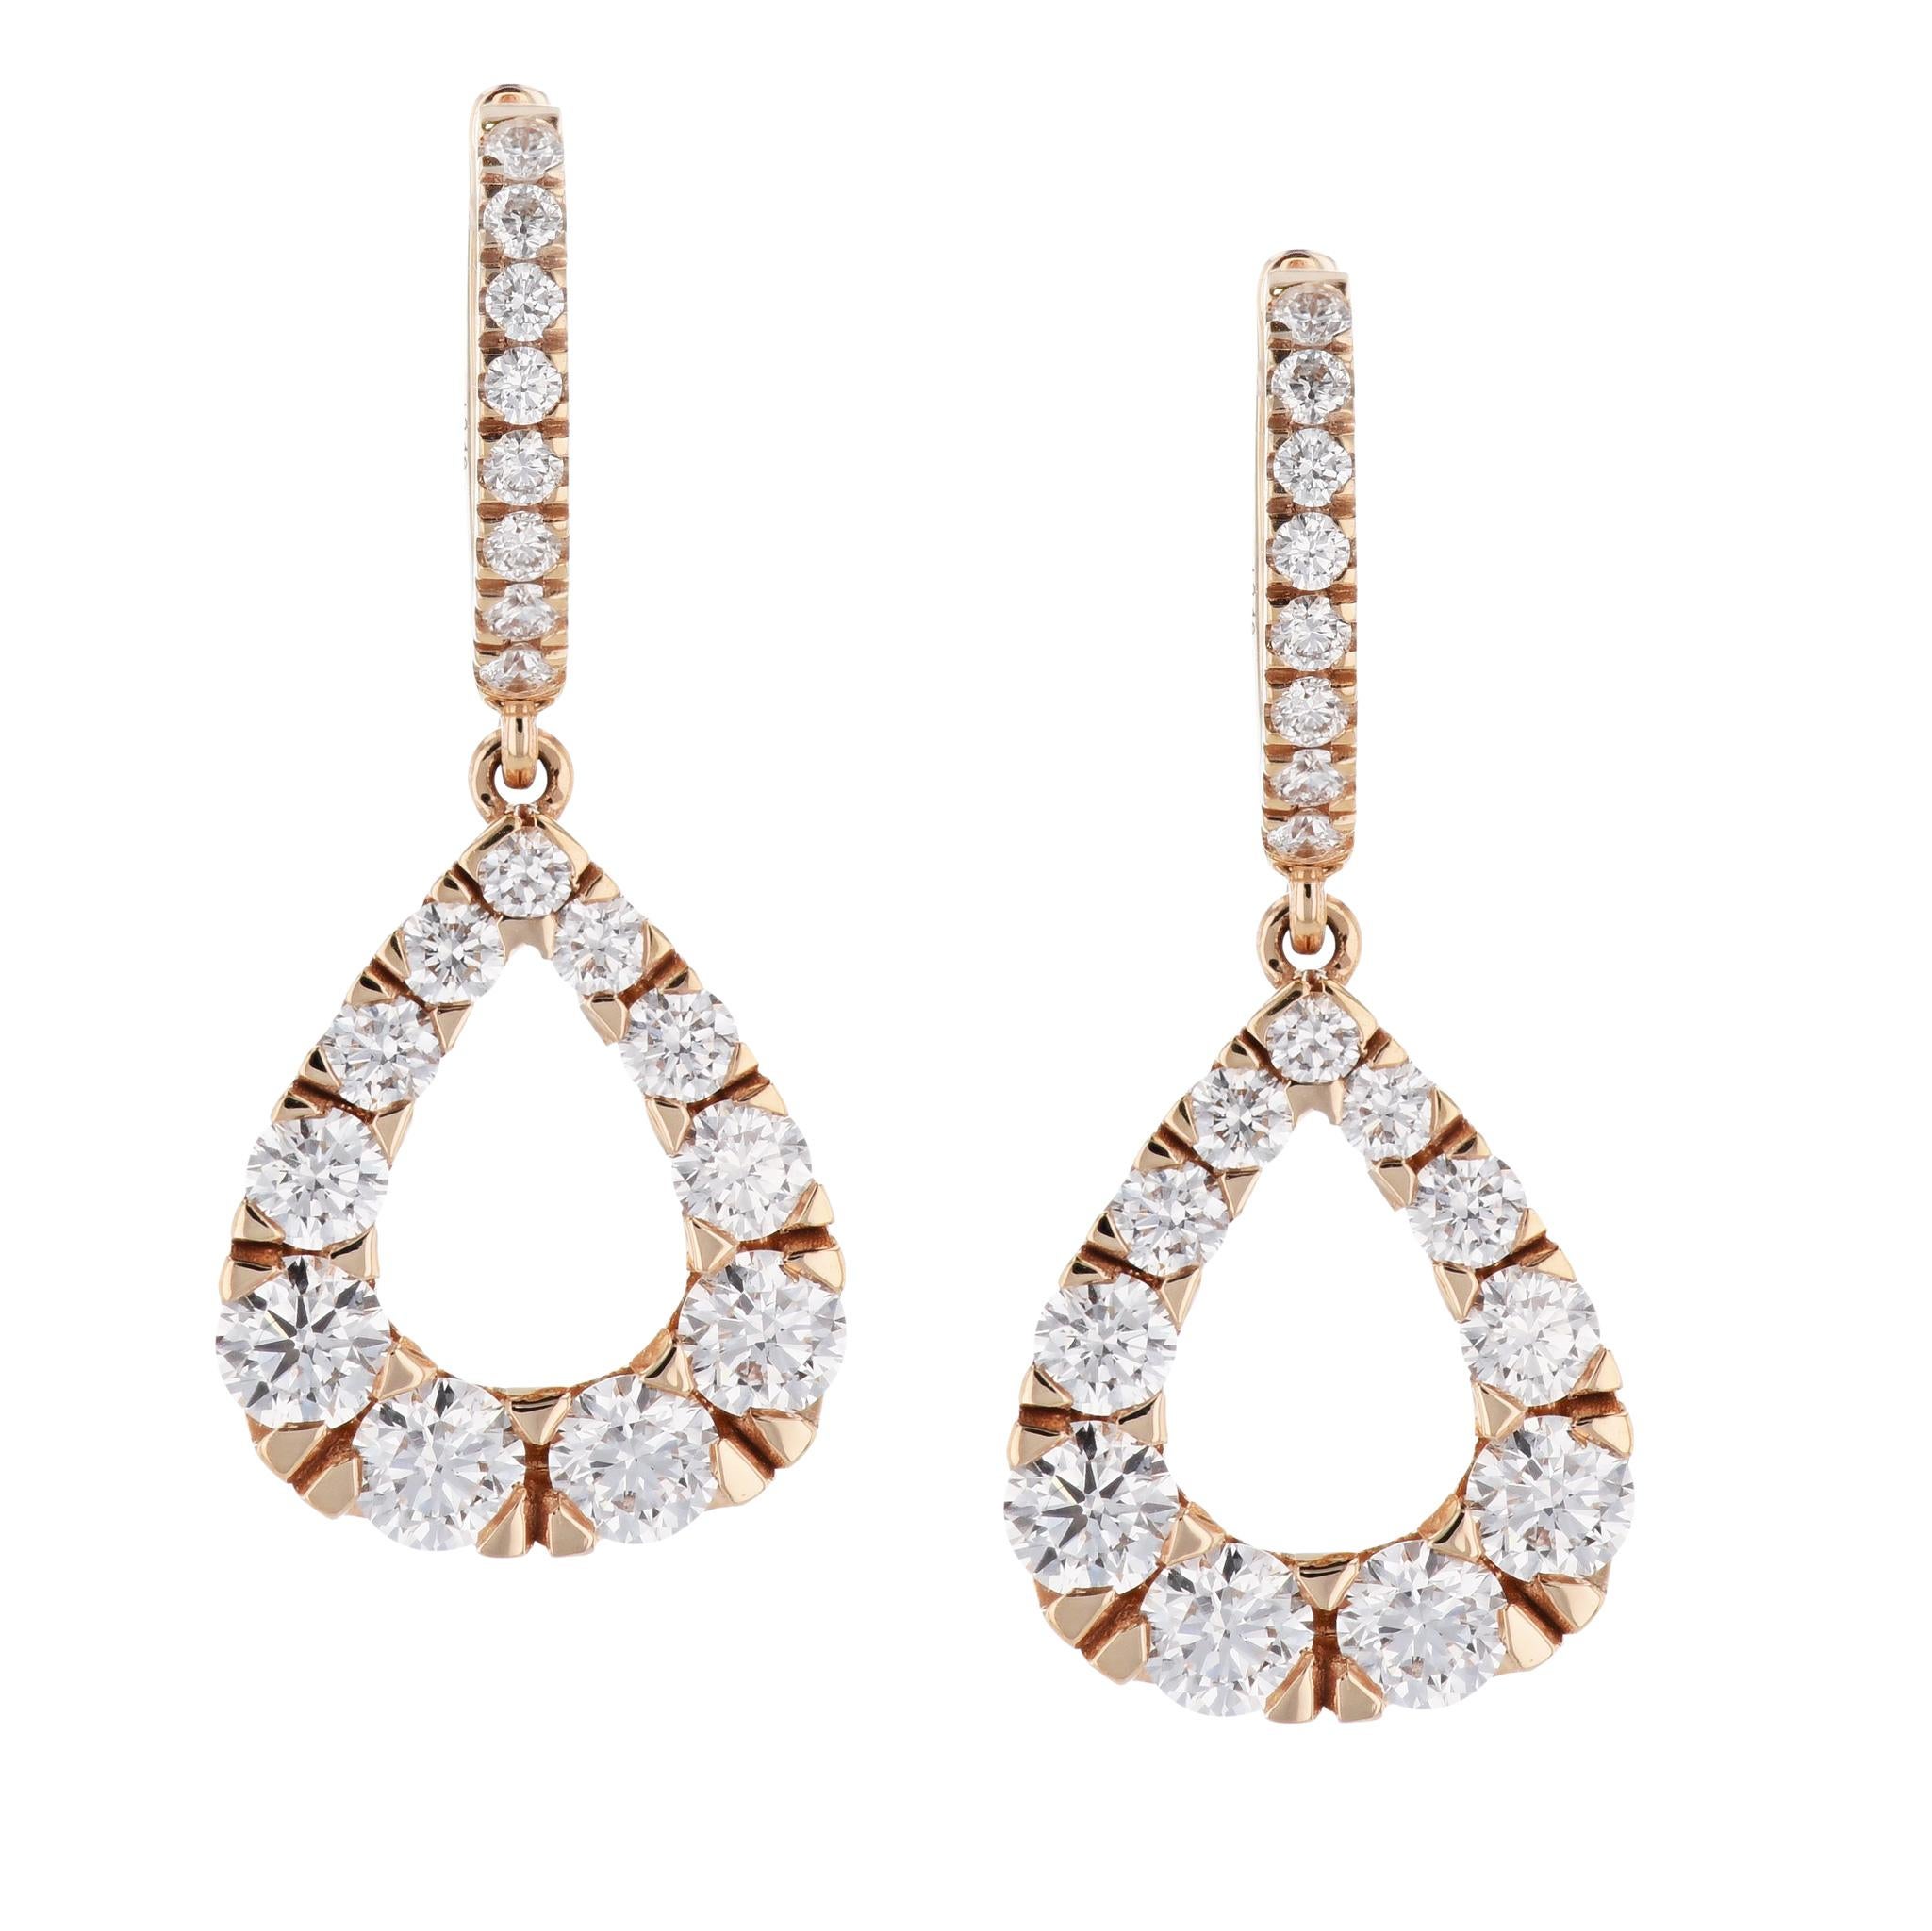 Glimmer with diamonds, in these 18 karat rose gold hoop drop earrings! They are a must have for any fine jewelry collector.
Indulge yourself or a loved one with these stunningly sophisticated and elegant earrings. 

They measure 29 mm long and 7 mm